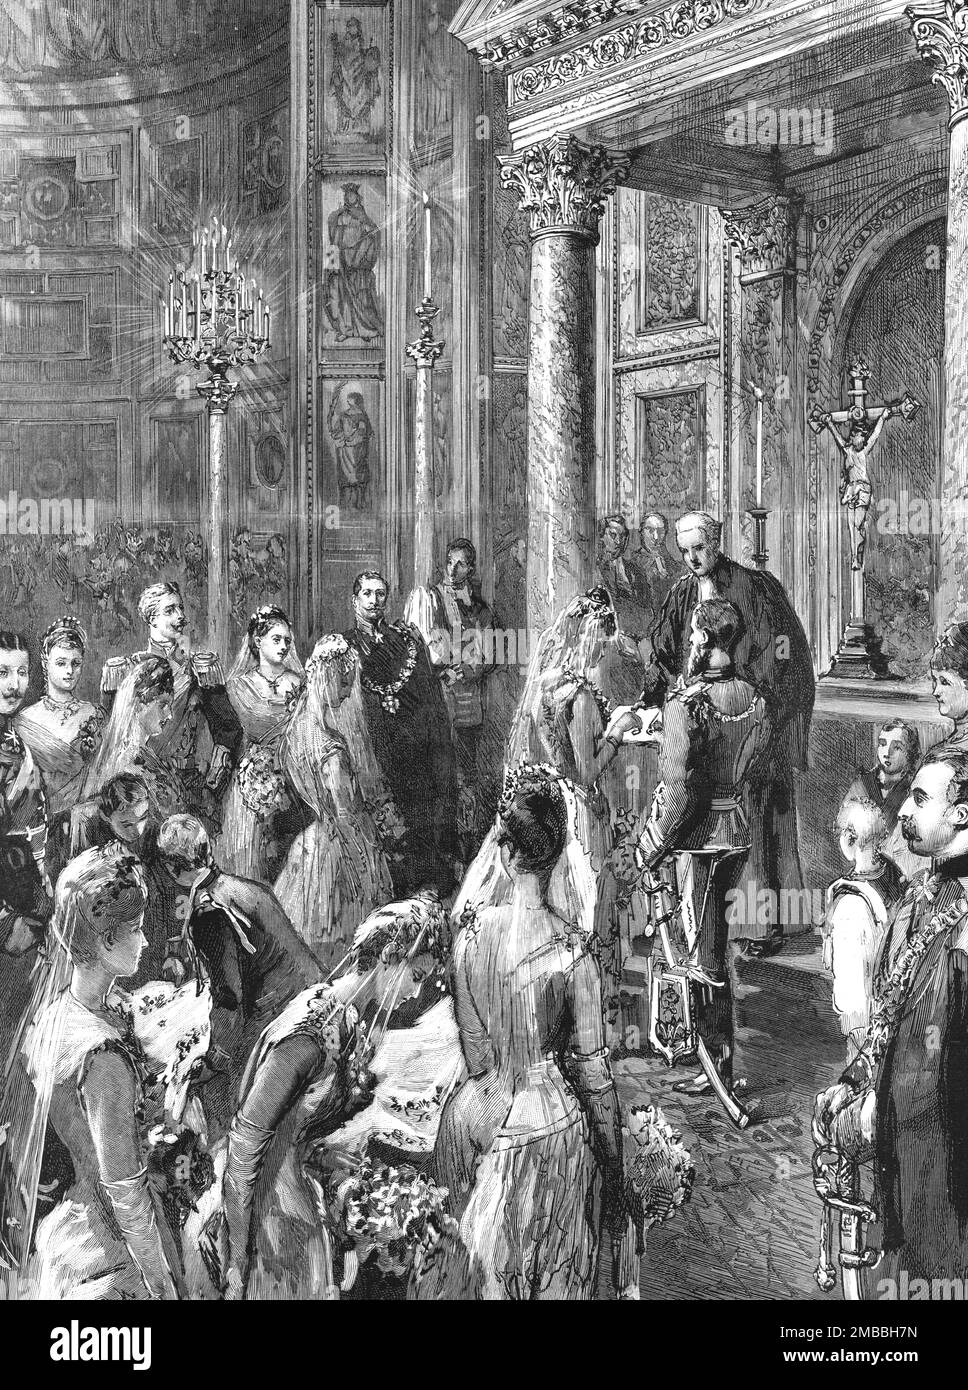 ''The Marriage of Princess Victoria, Daughter of the Empress Frederick, to Prince Adolphus of Schaumburg-Lippe, at Berlin; The Ceremony', 1890. From &quot;The Graphic. An Illustrated Weekly Newspaper&quot;, Volume 42. July to December, 1890. Stock Photo